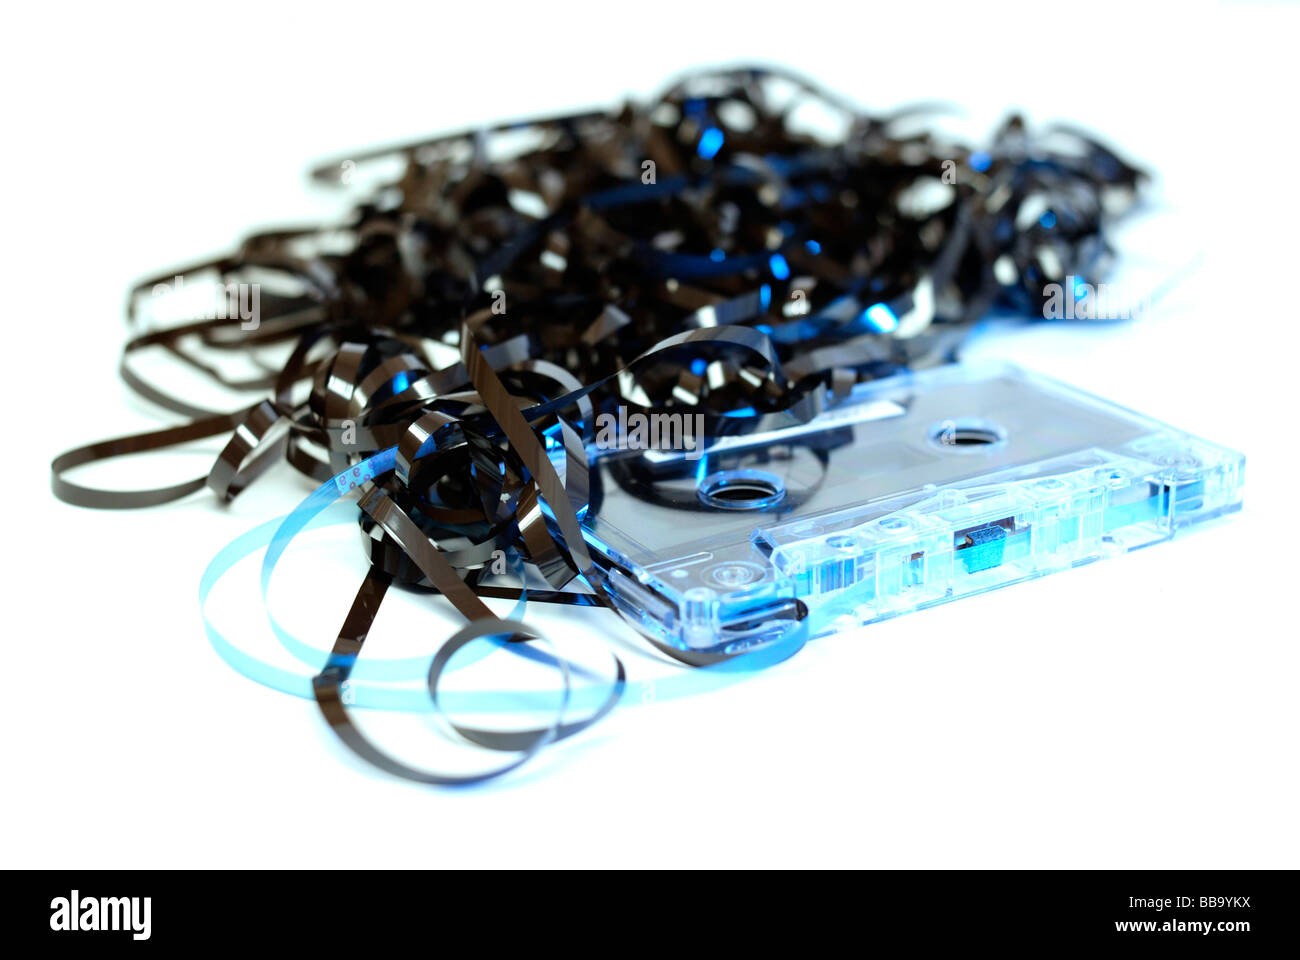 Unspooled and tangled audio cassette tape vintage retro technology. Stock Photo